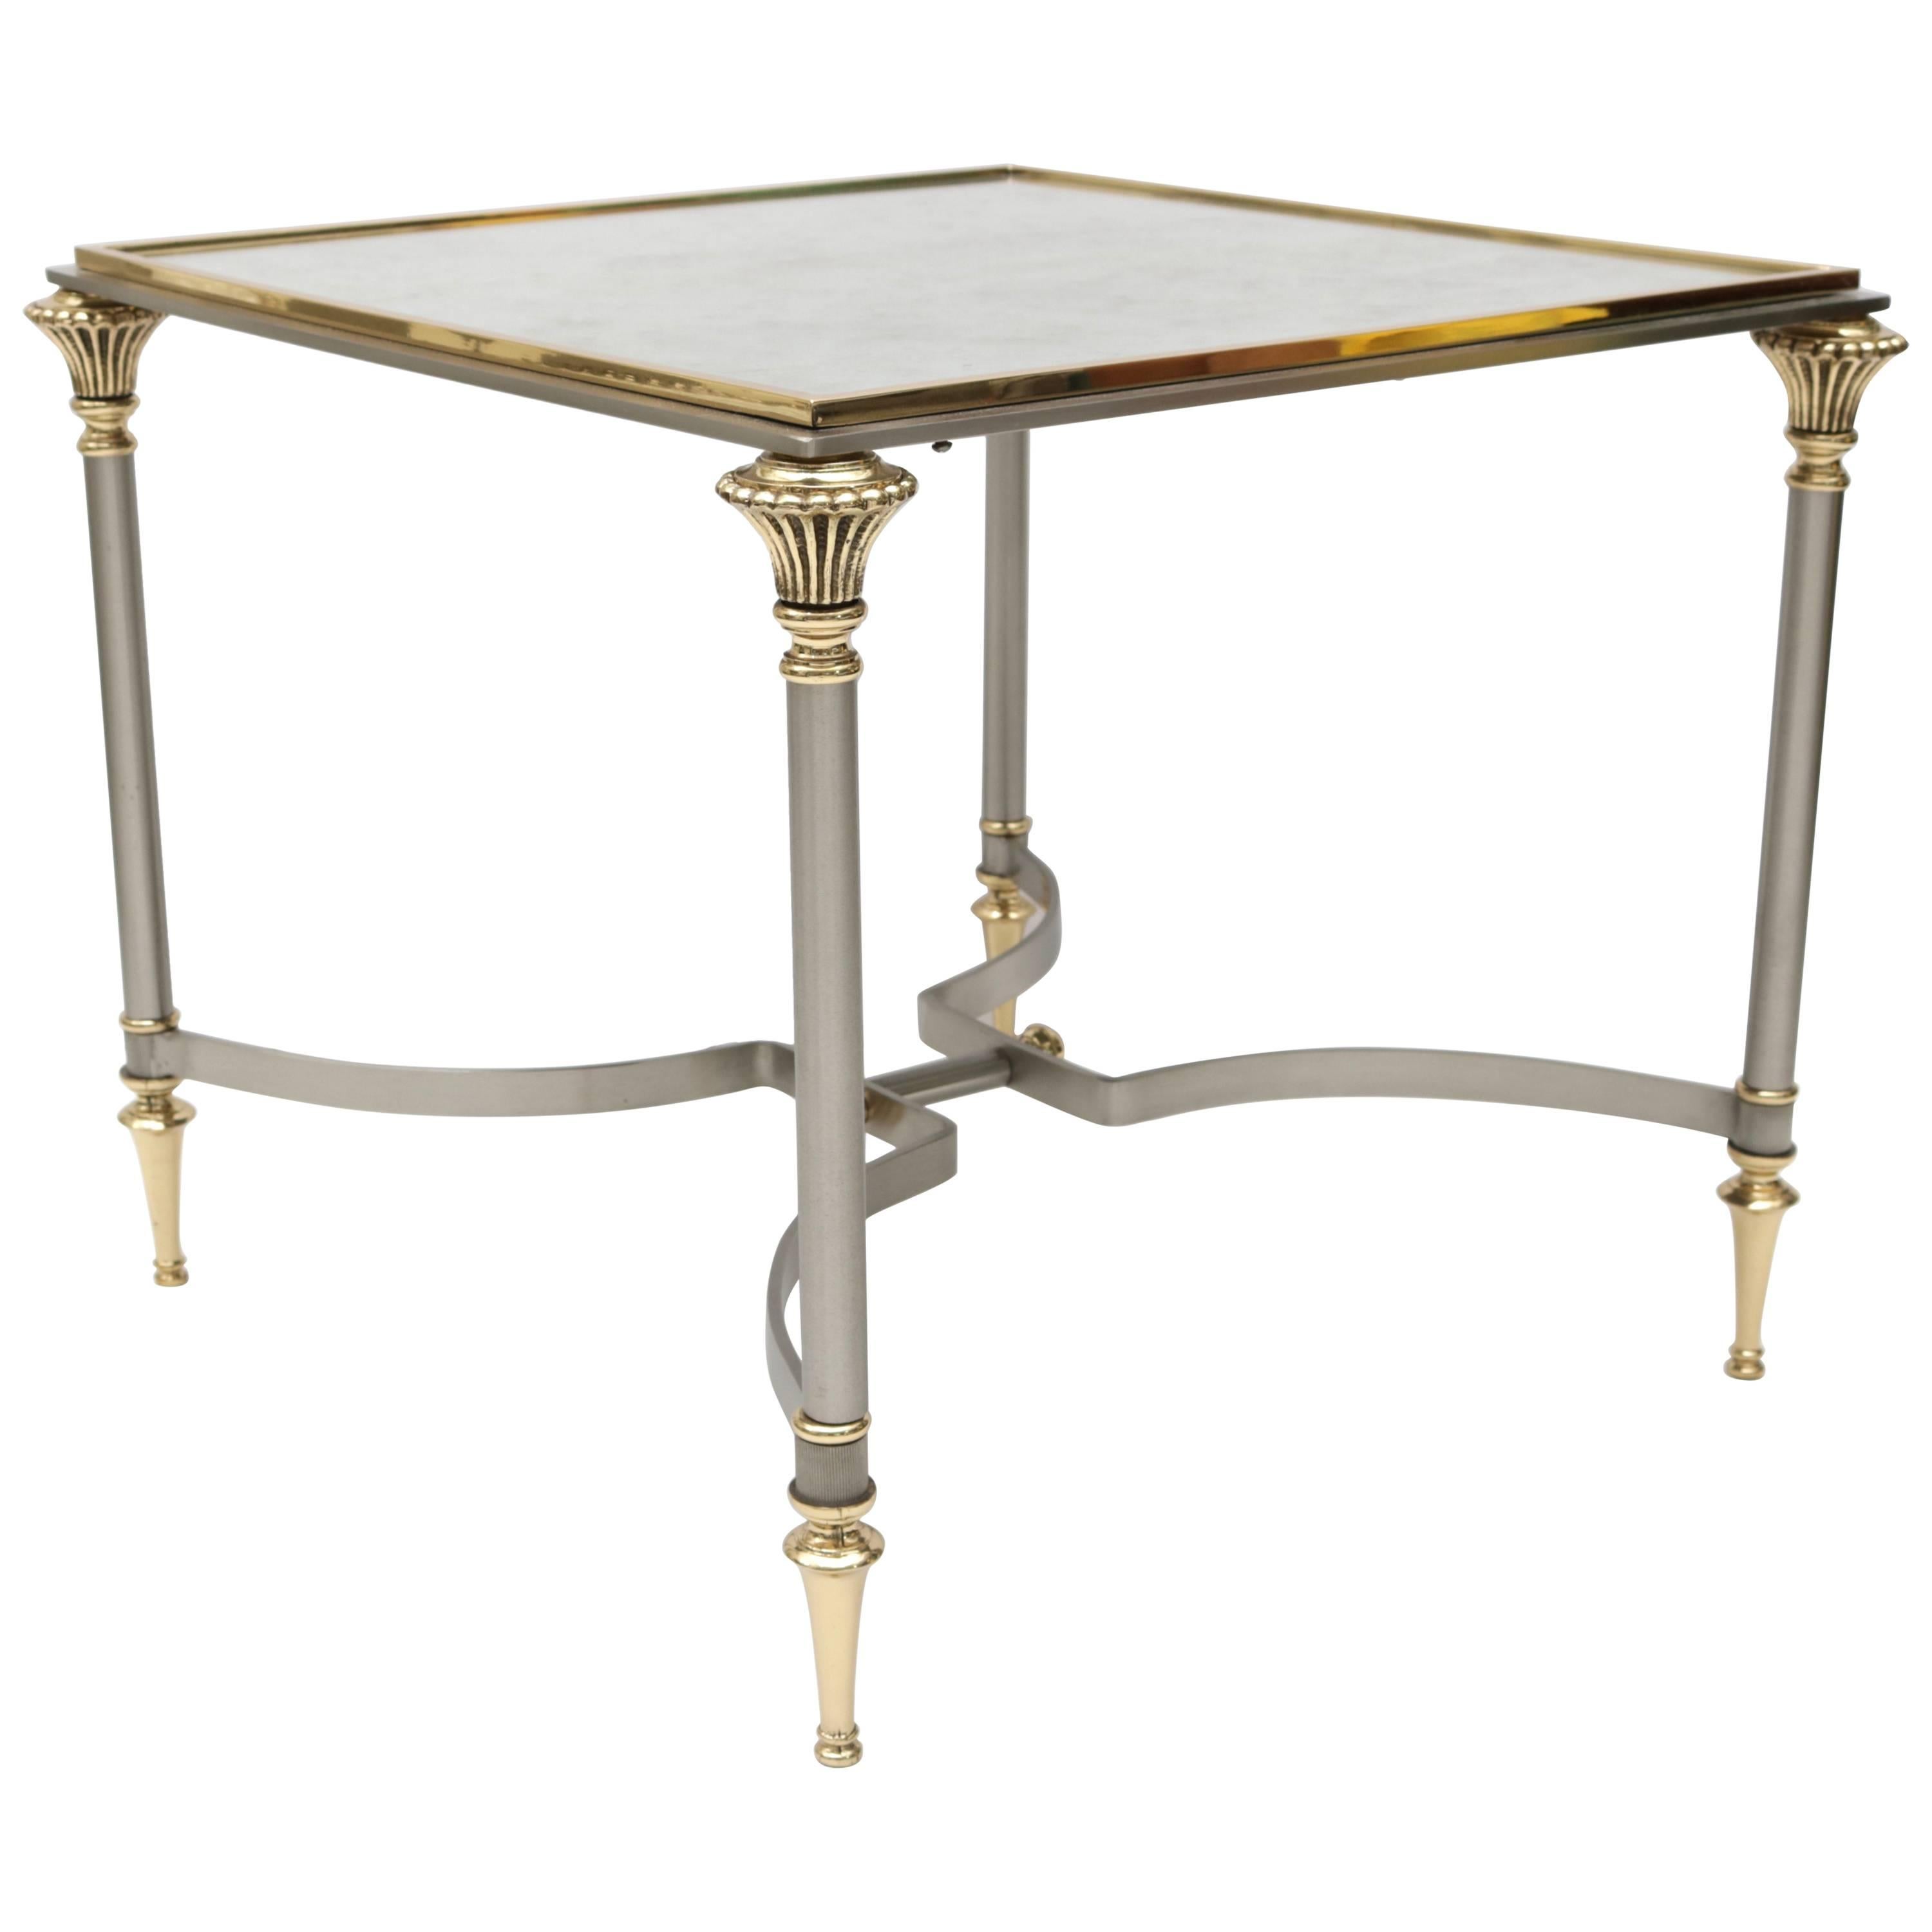  Side Table in Brass, Satin Steel and Antiqued Mirror